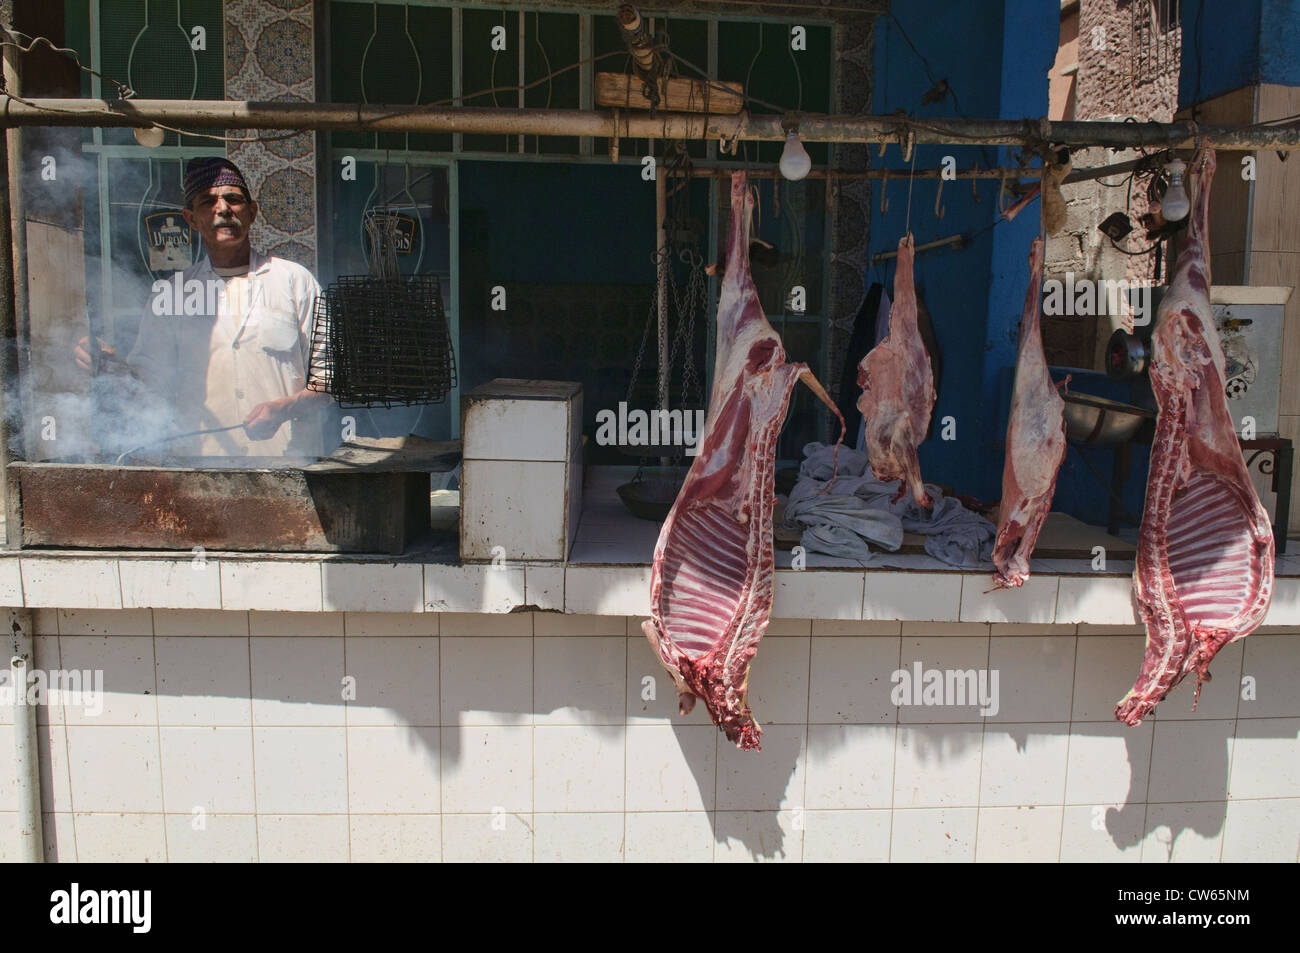 meat for sale in the ancient medina in Marrakech, Morocco Stock Photo